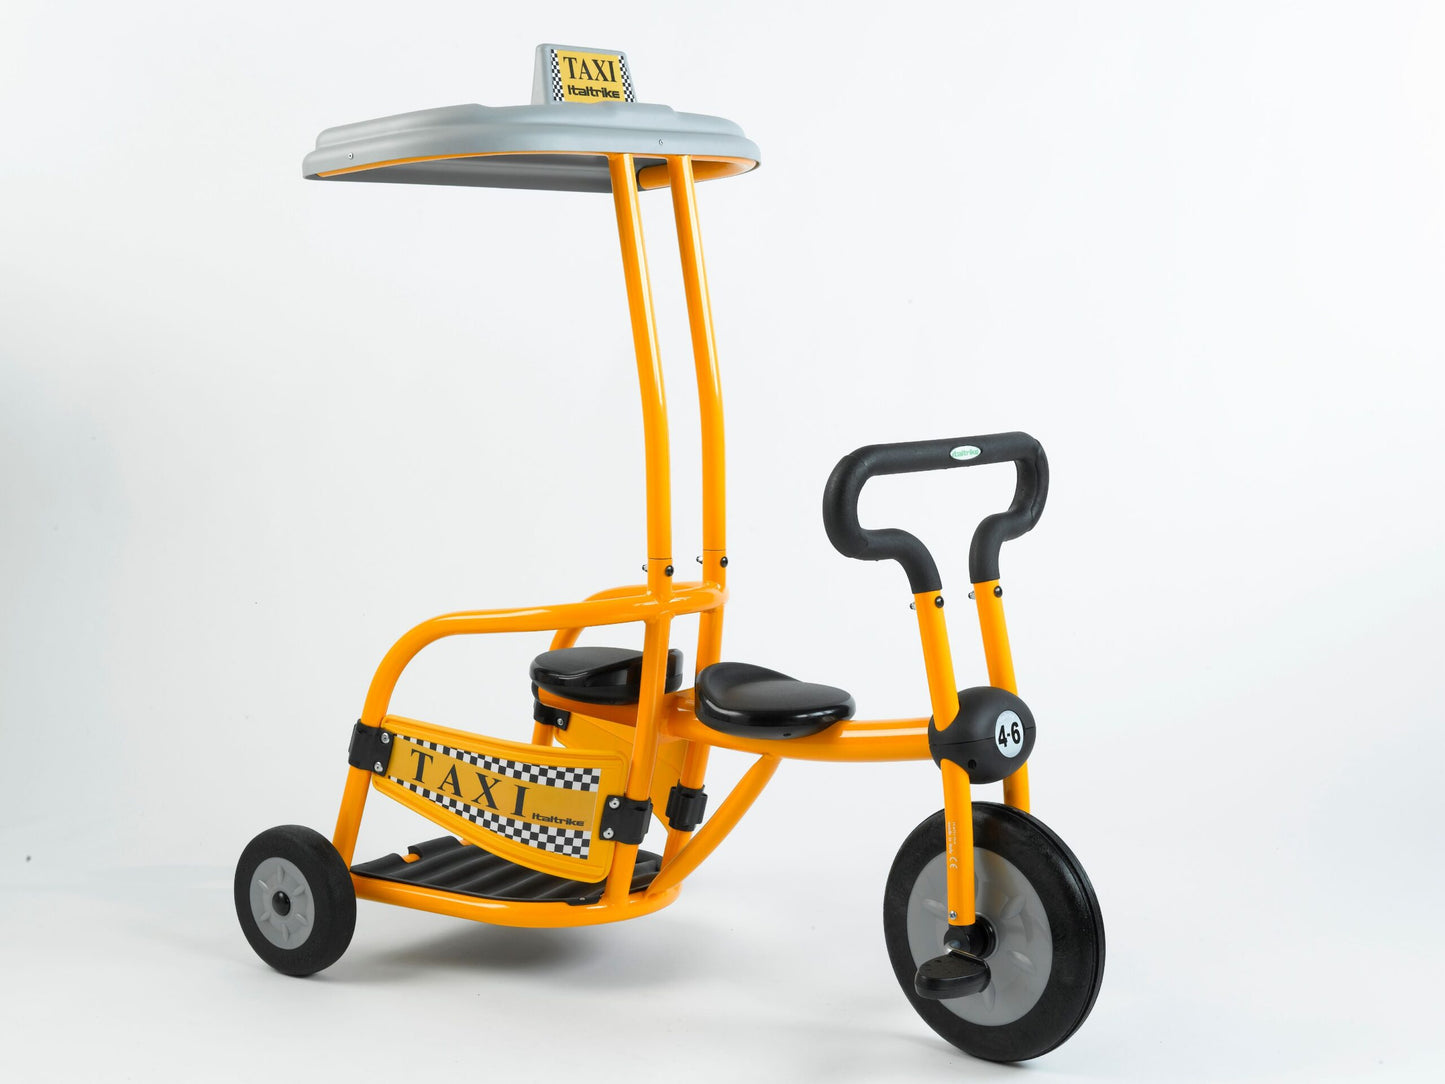 Italtrike Taxi für 2 Kinder made in Italy